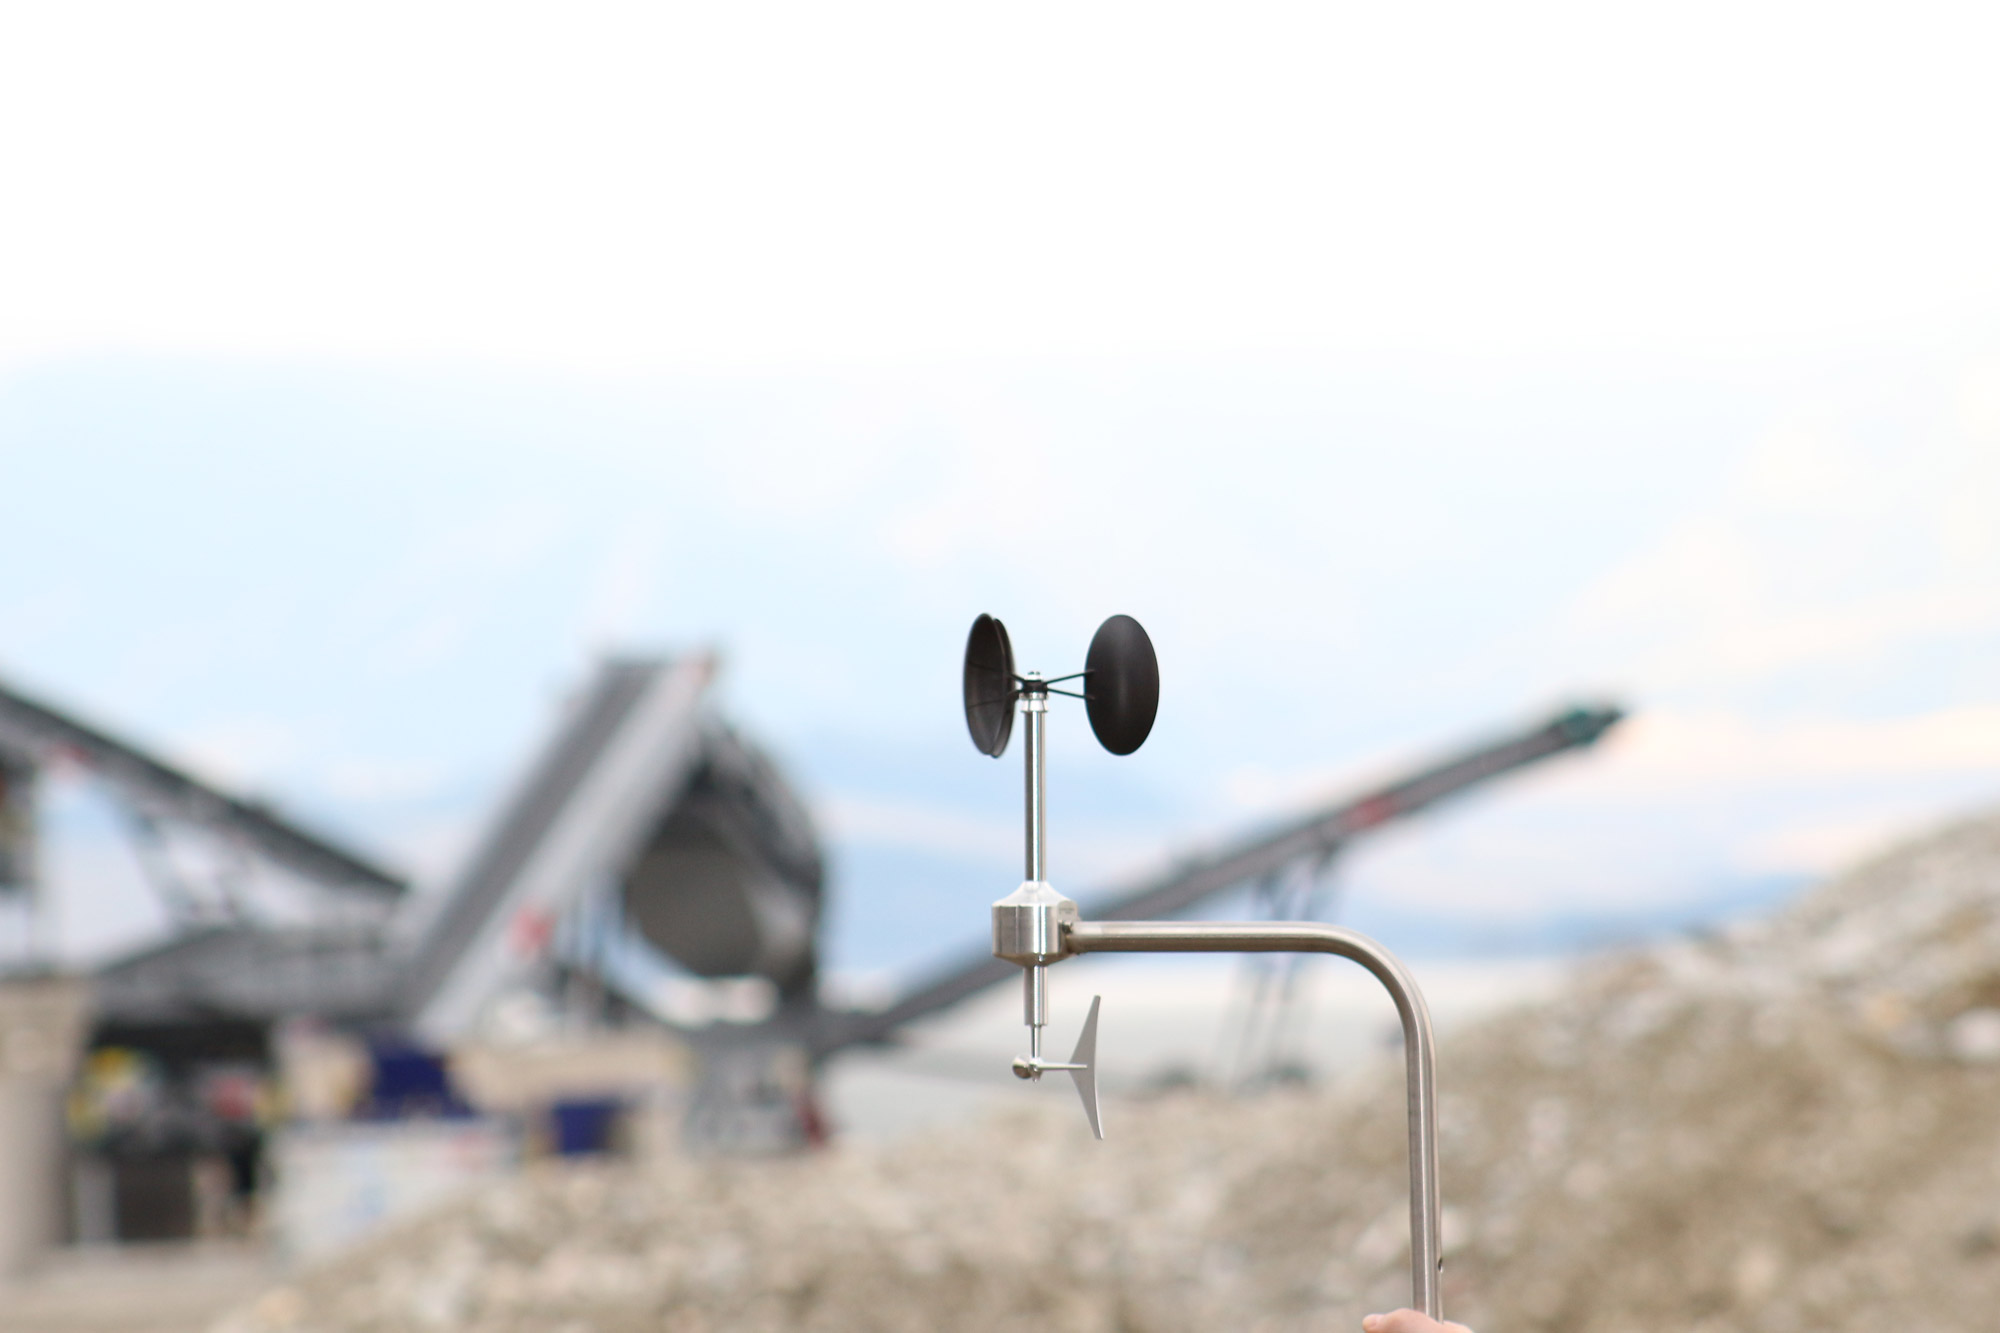 Anemometer in an industrial plant